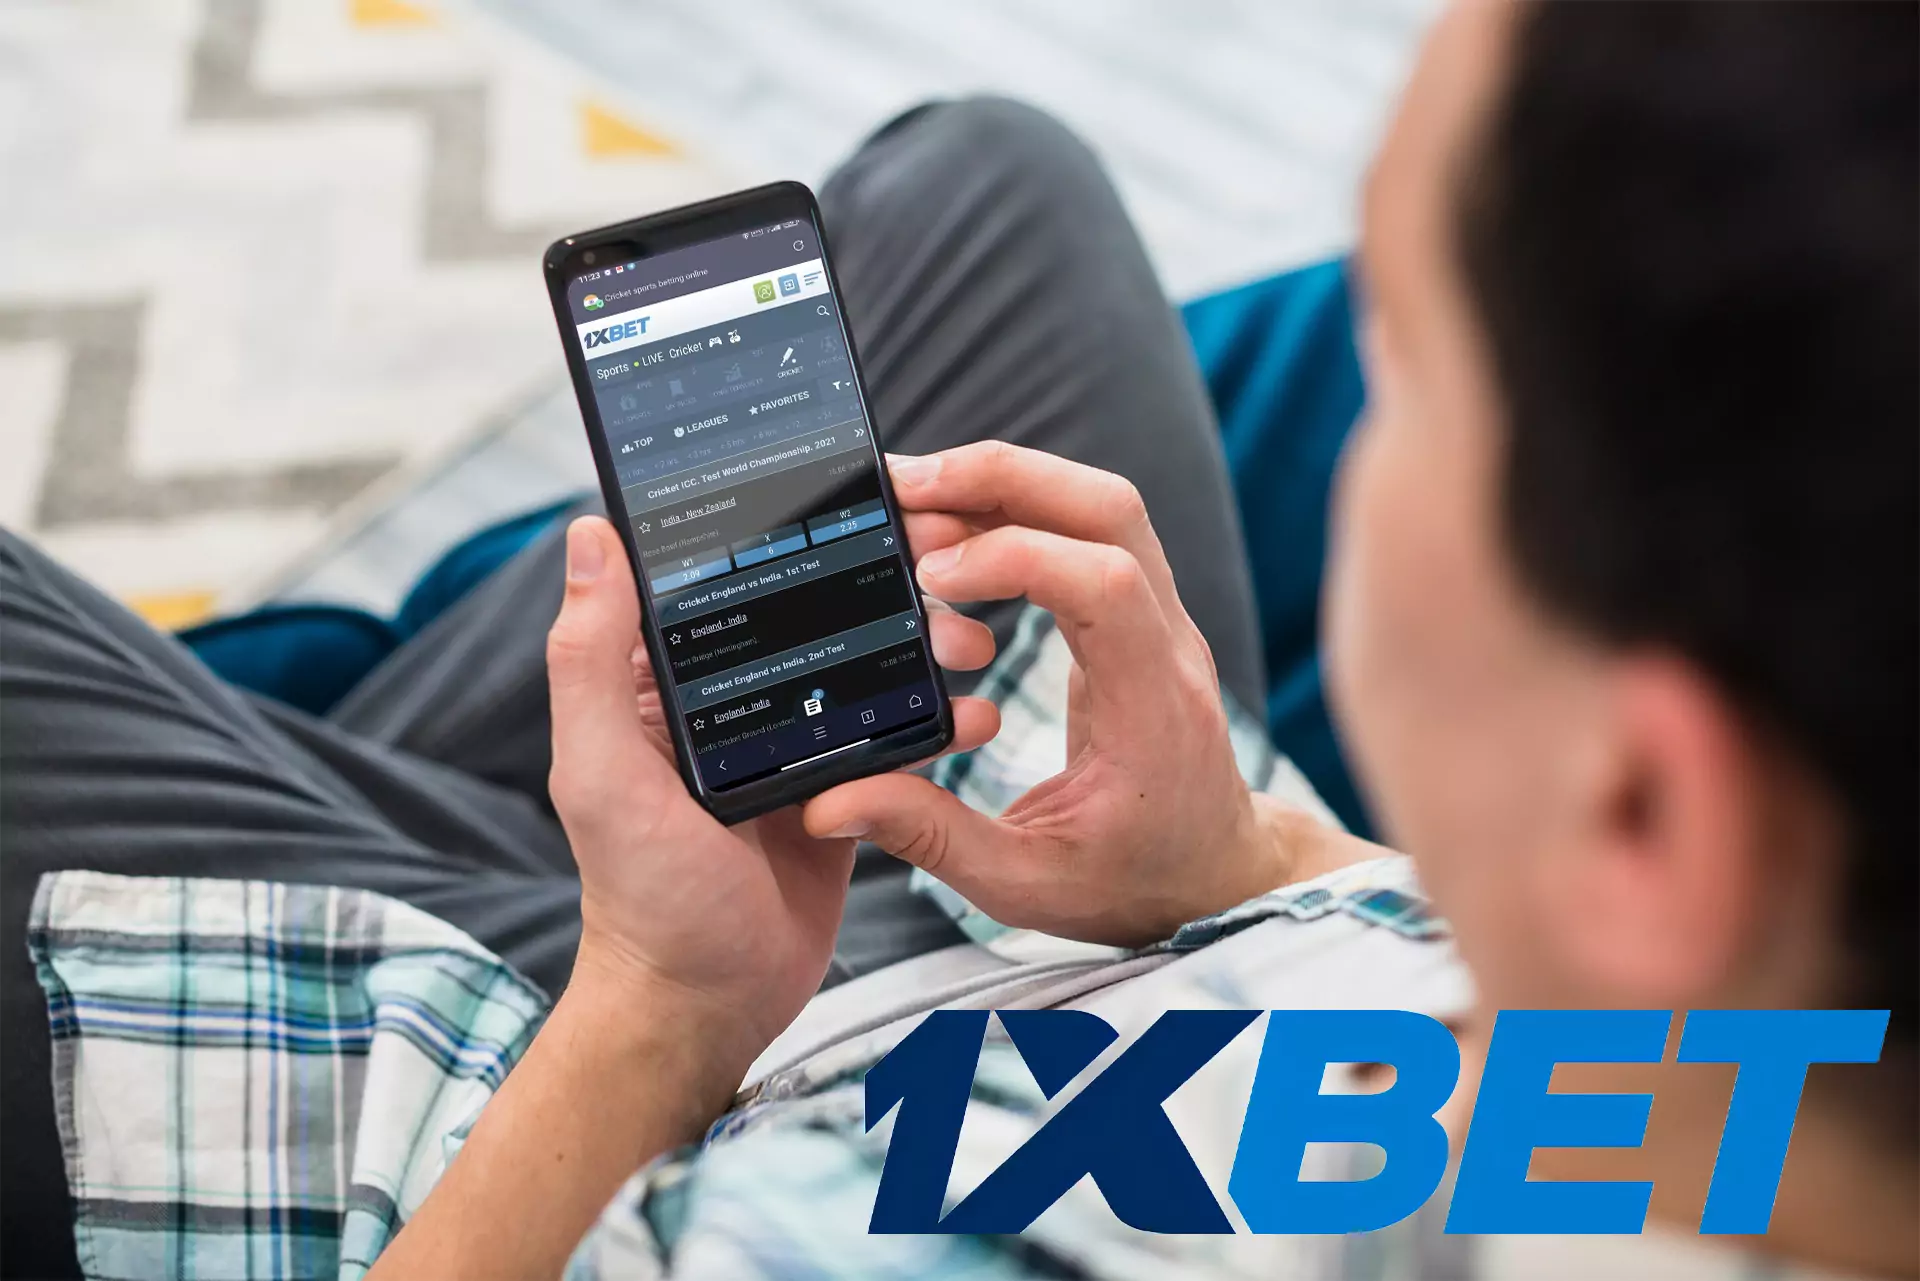 If you can't install a separate 1xBet app, use the mobile version of the official site.